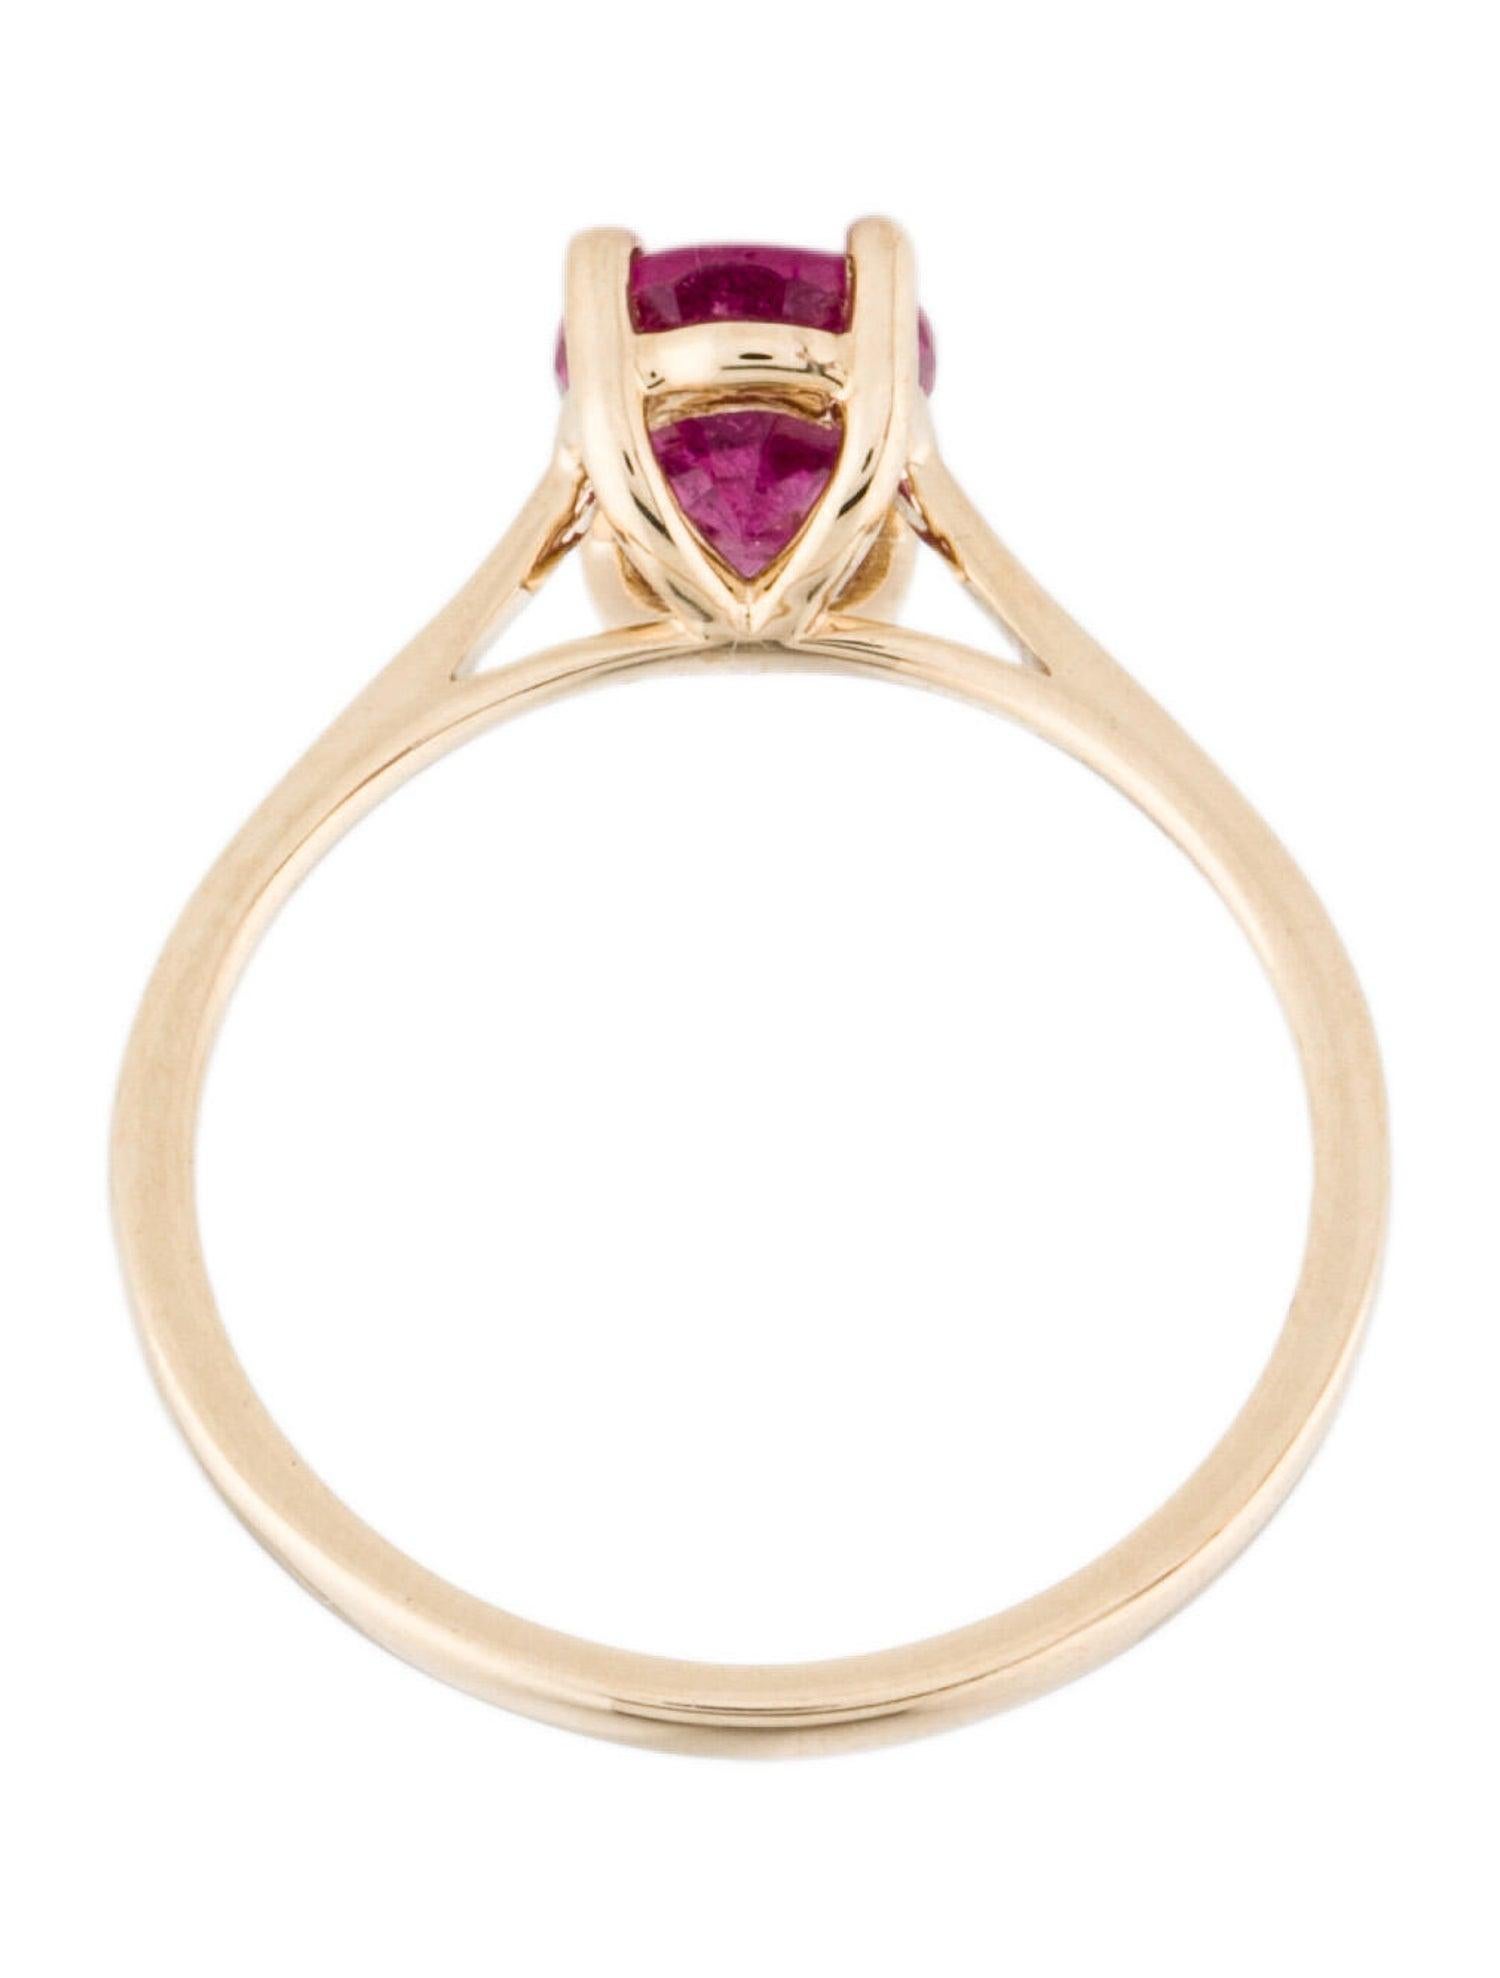 Radiant 14K 1.26ct Tourmaline Solitaire Cocktail Ring - Size 7 - Timeless In New Condition For Sale In Holtsville, NY